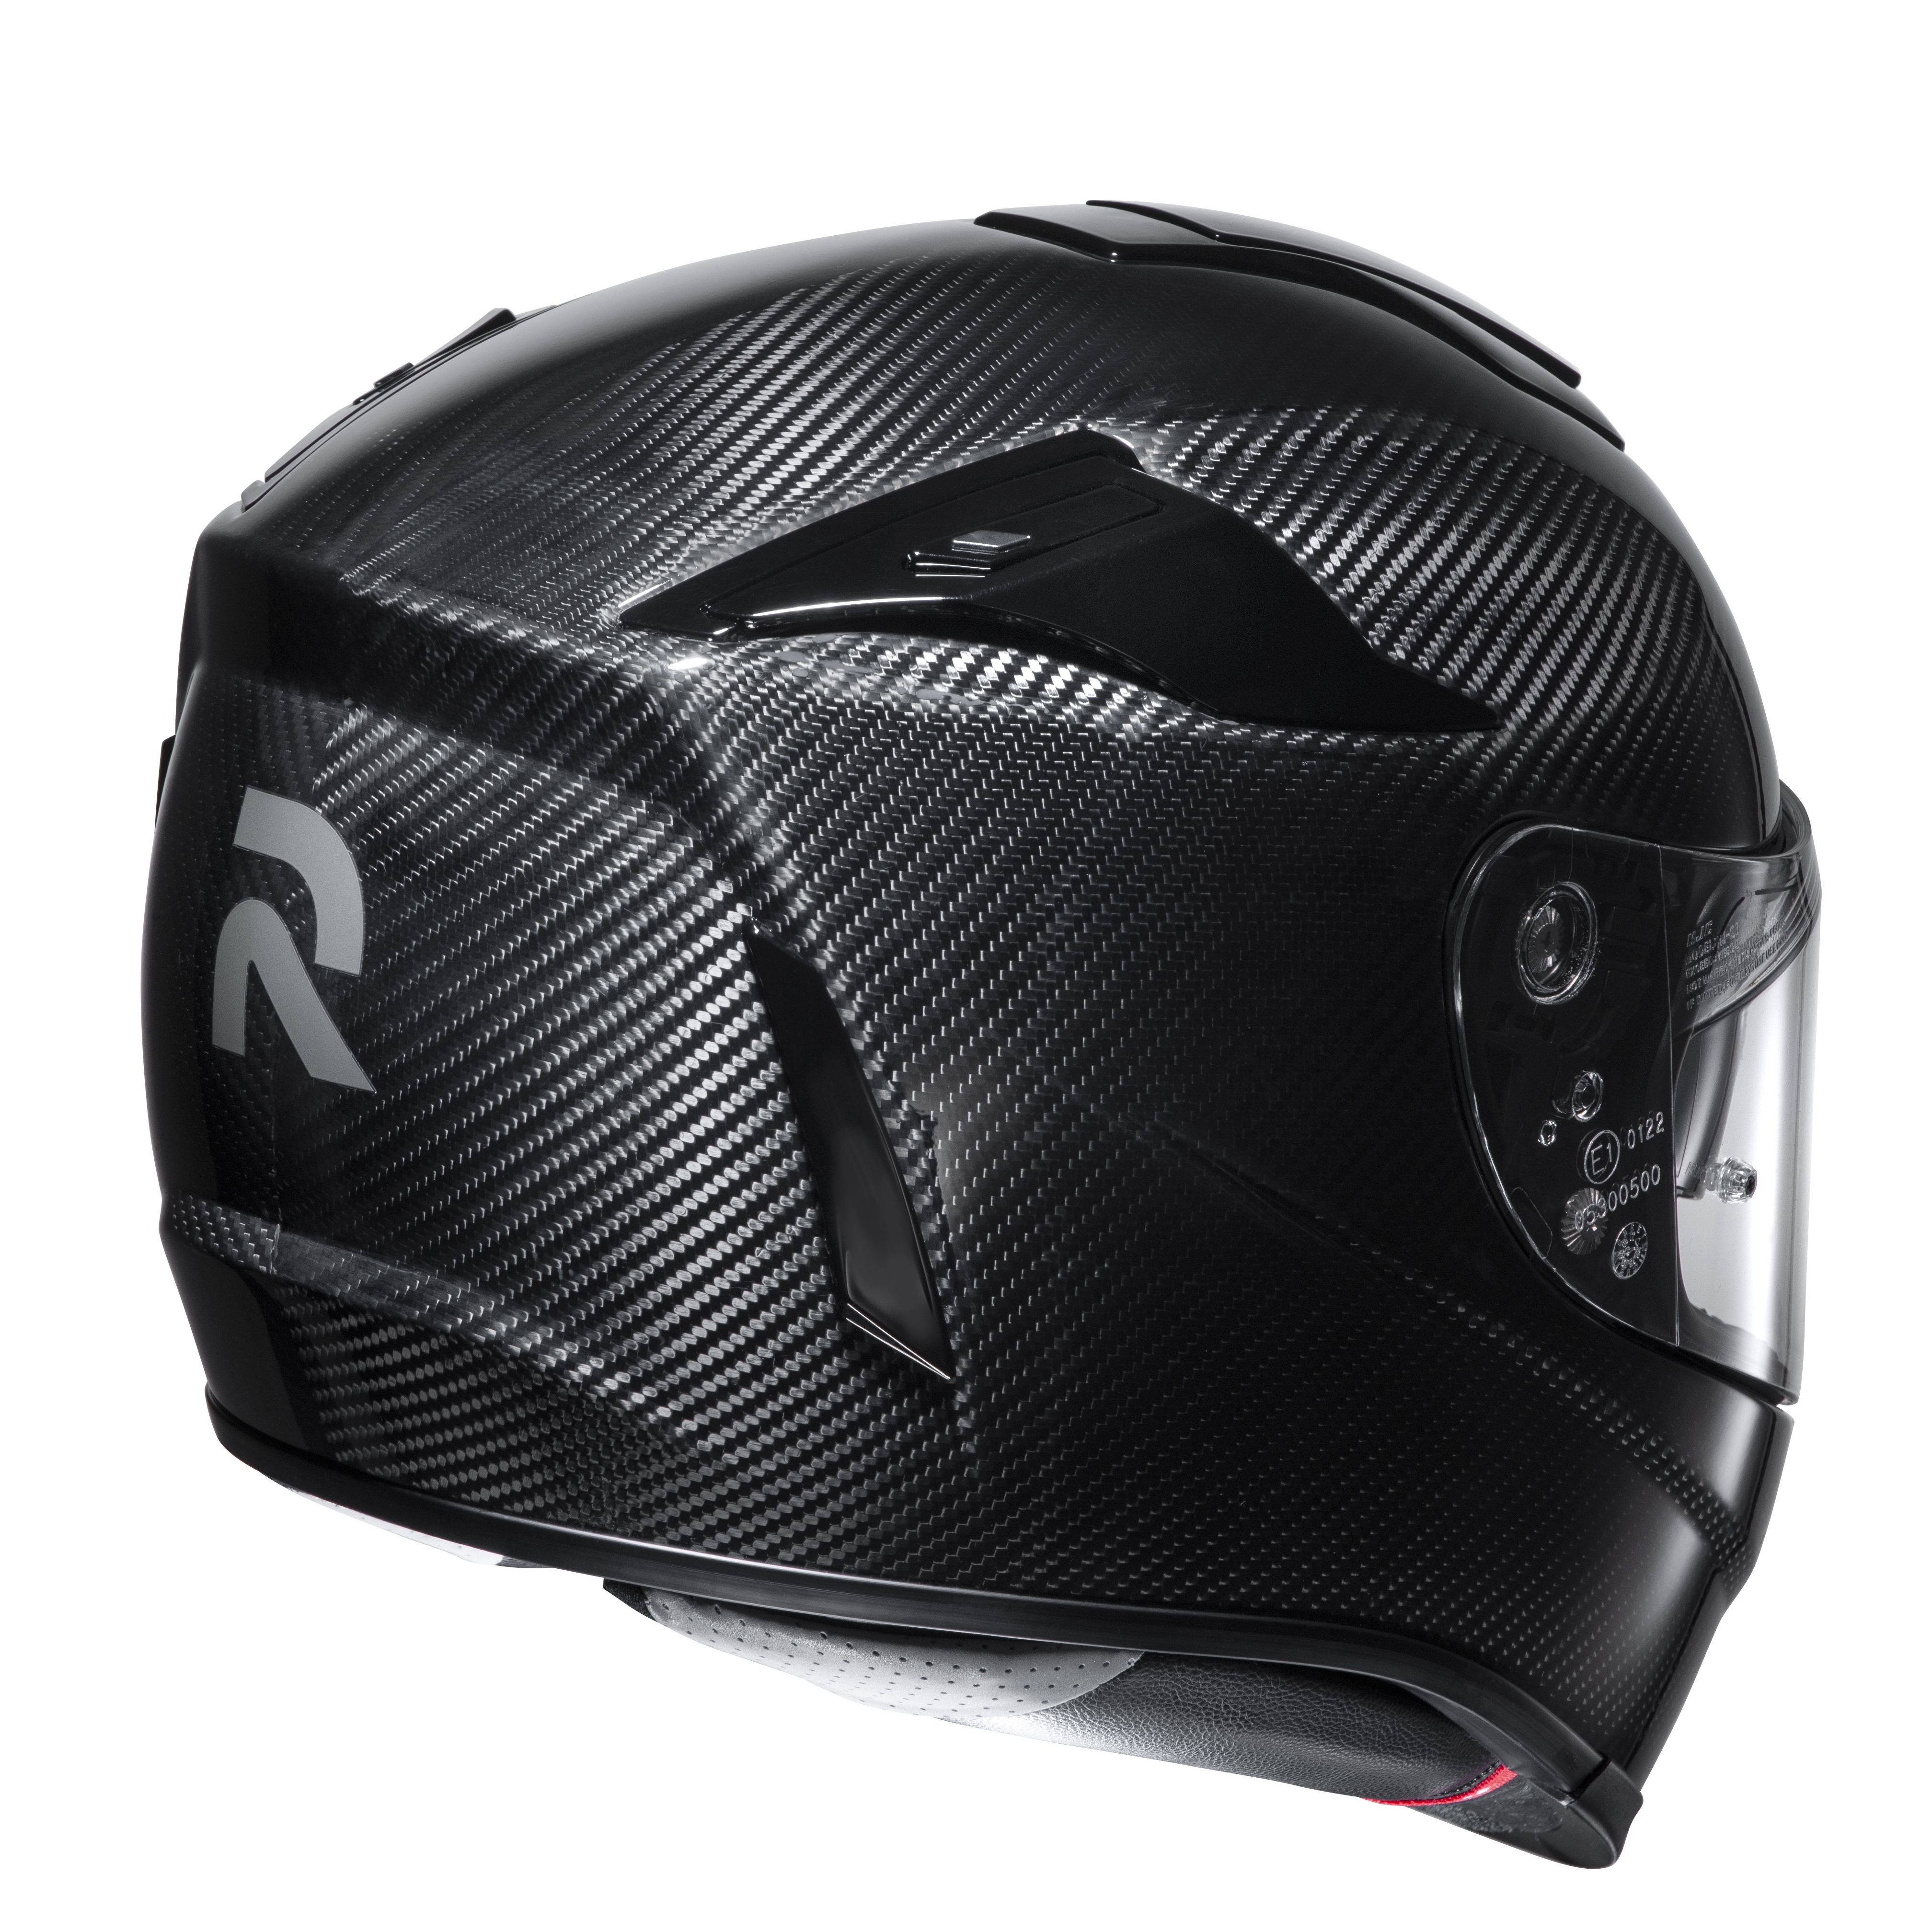 70 CARBON » HJC Colombia Cascos HJC Colombia